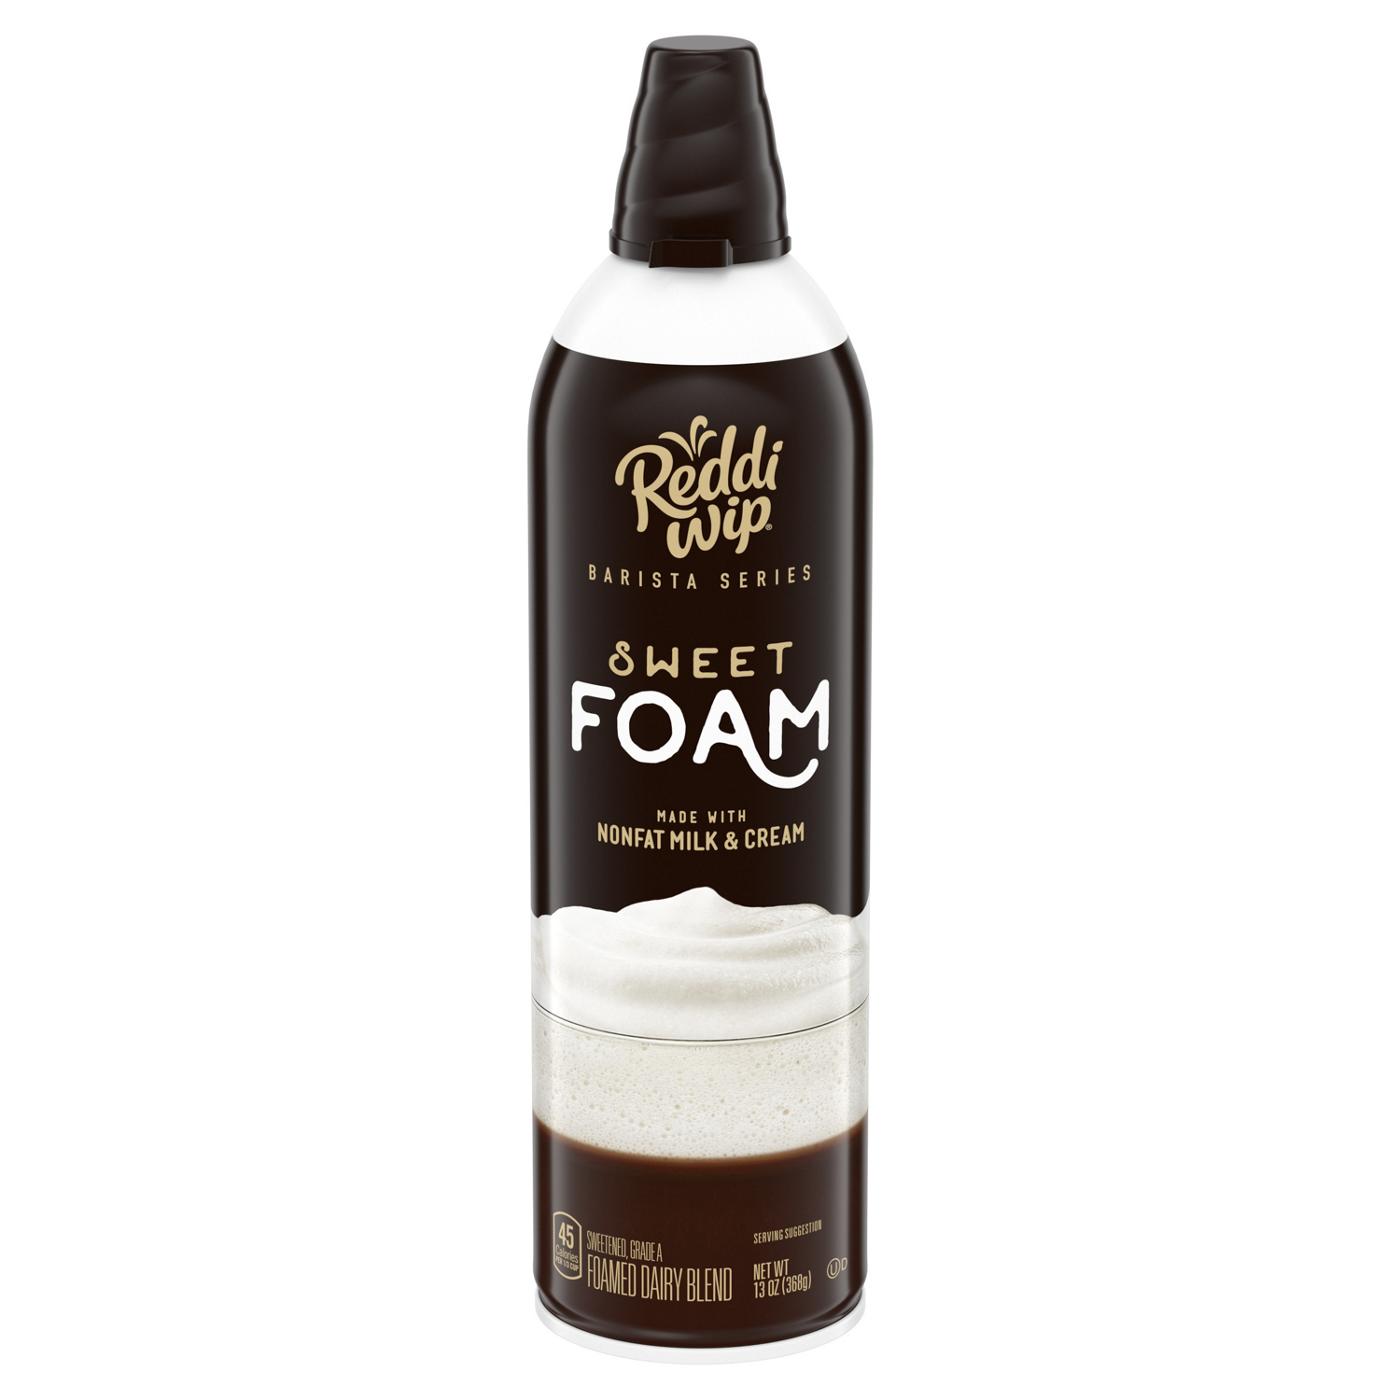 Reddi Wip Barista Series Sweet Foam Coffee Creamer Topper Made with Nonfat Milk and Cream; image 1 of 7